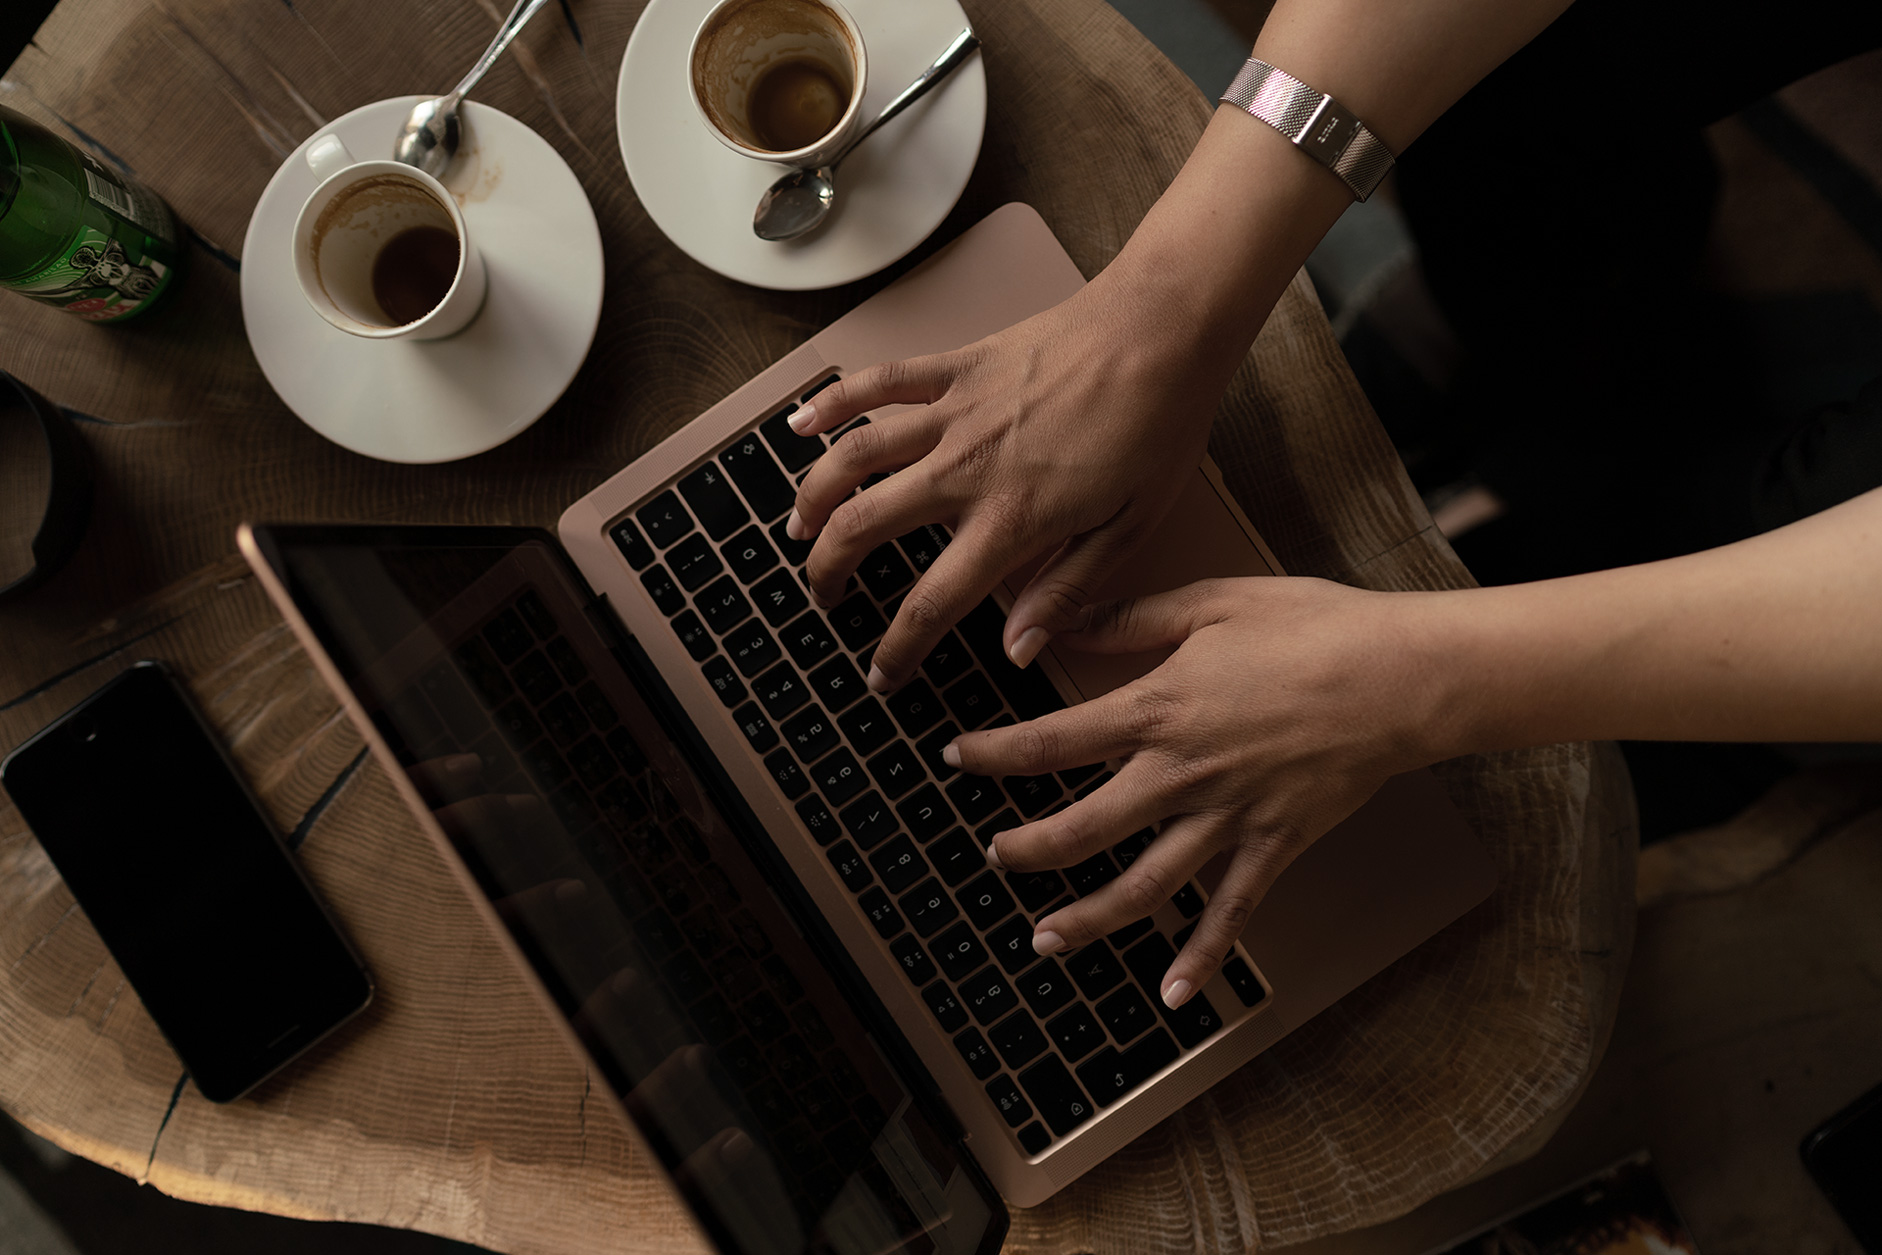 the-woman-s-hands-on-the-laptop-and-coffee-cups-ne